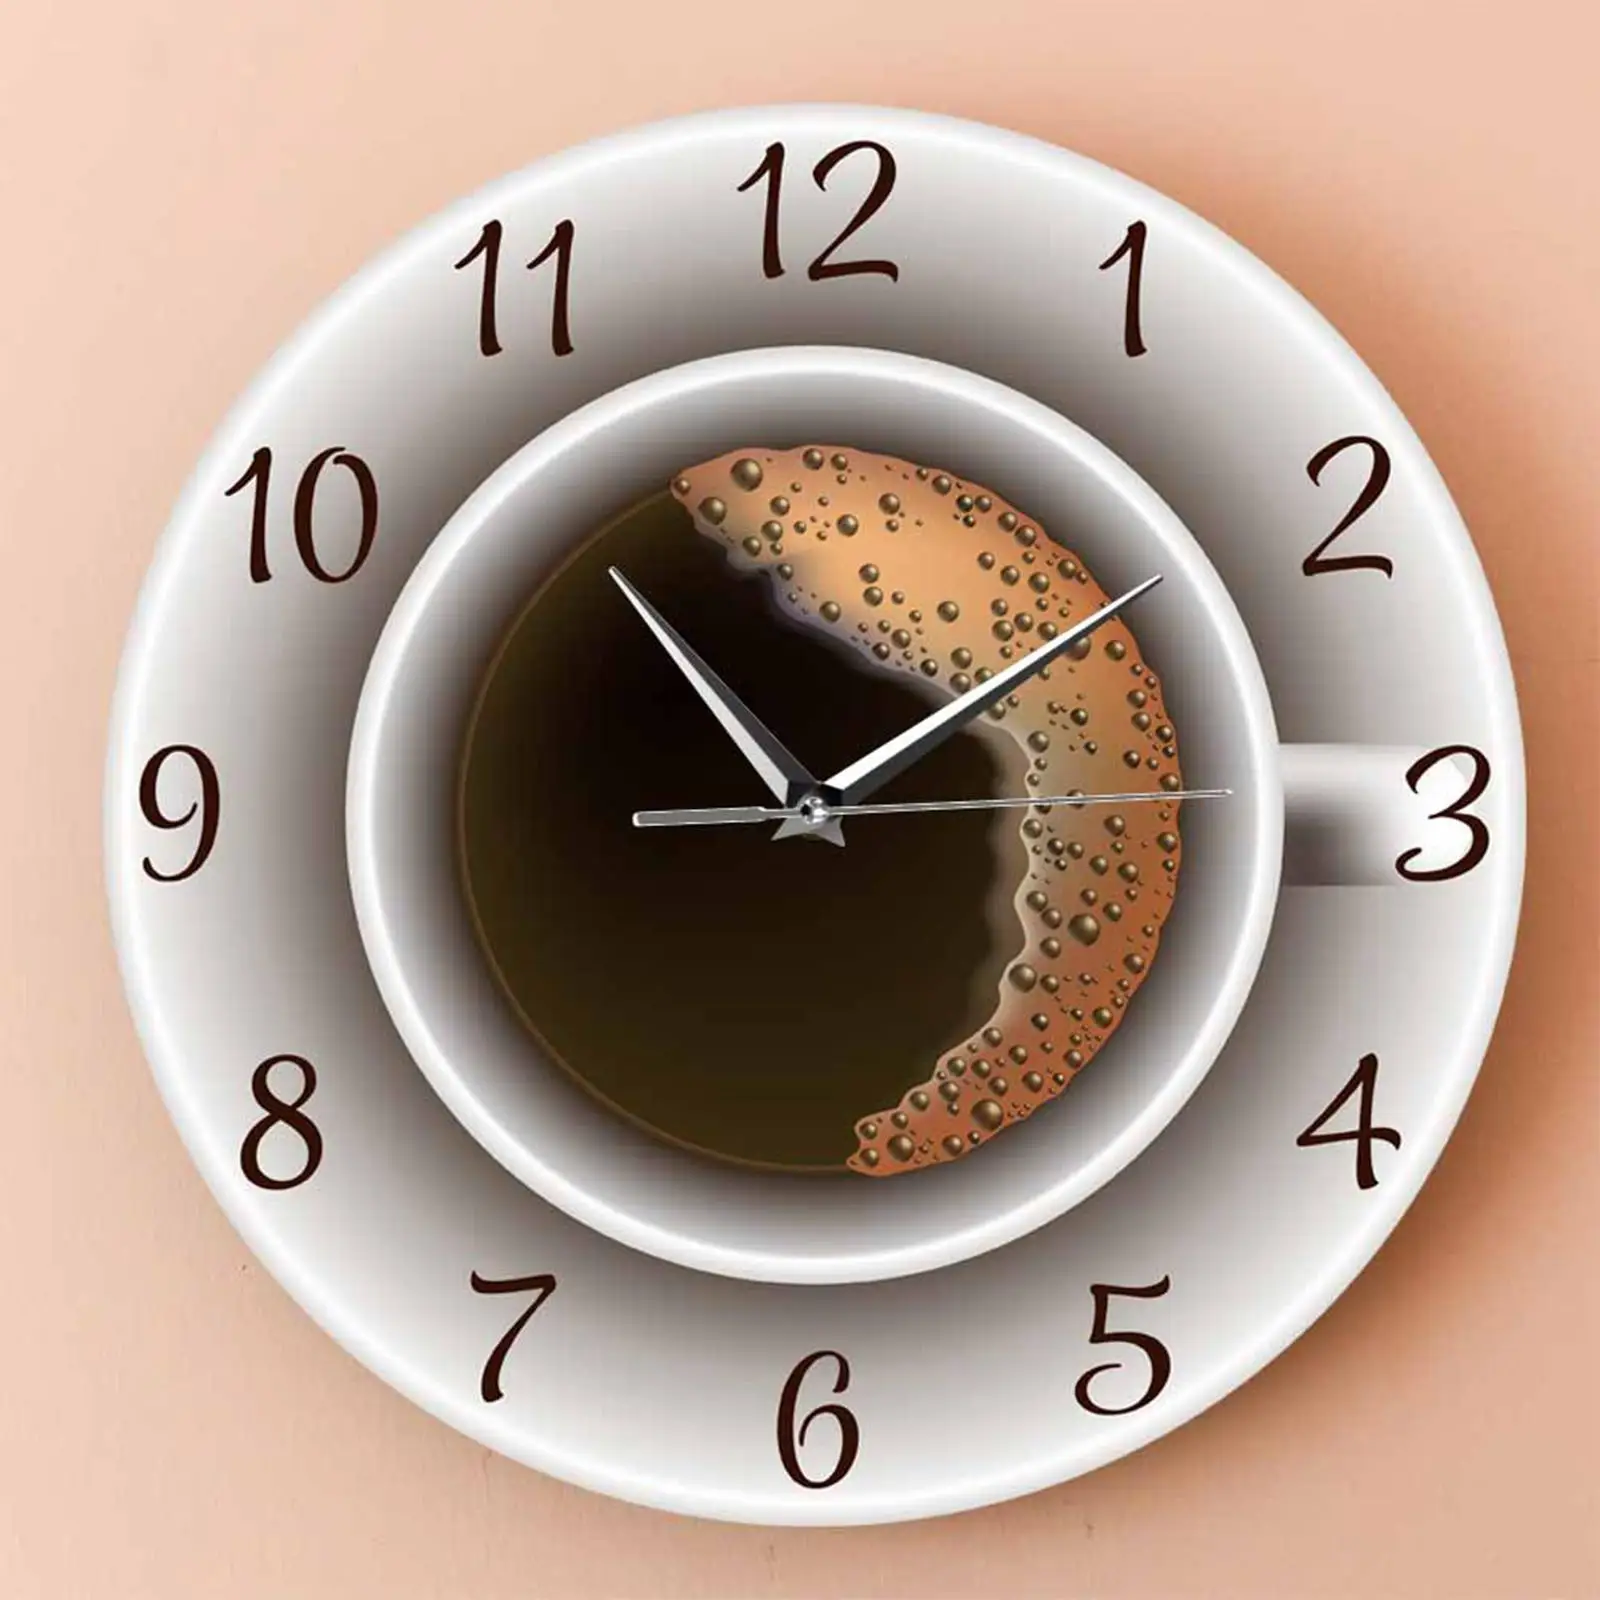 Coffee Cup Wall Clocks 30cm Printed Decal Image for Kitchen Easy to Read